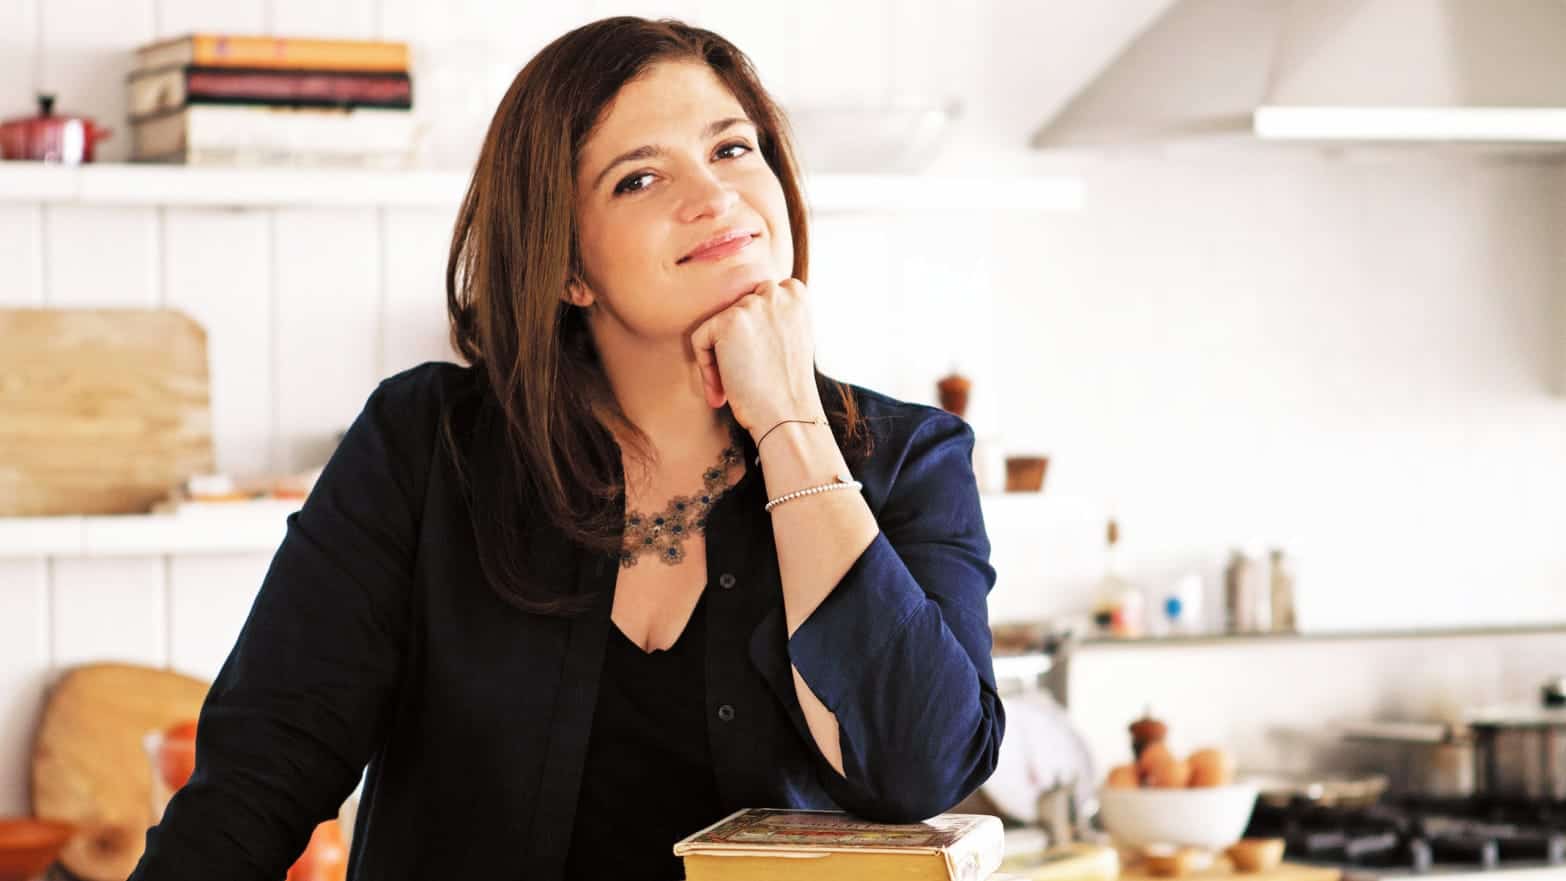 Alex Guarnaschelli, the host of Supermarket Stakeout.